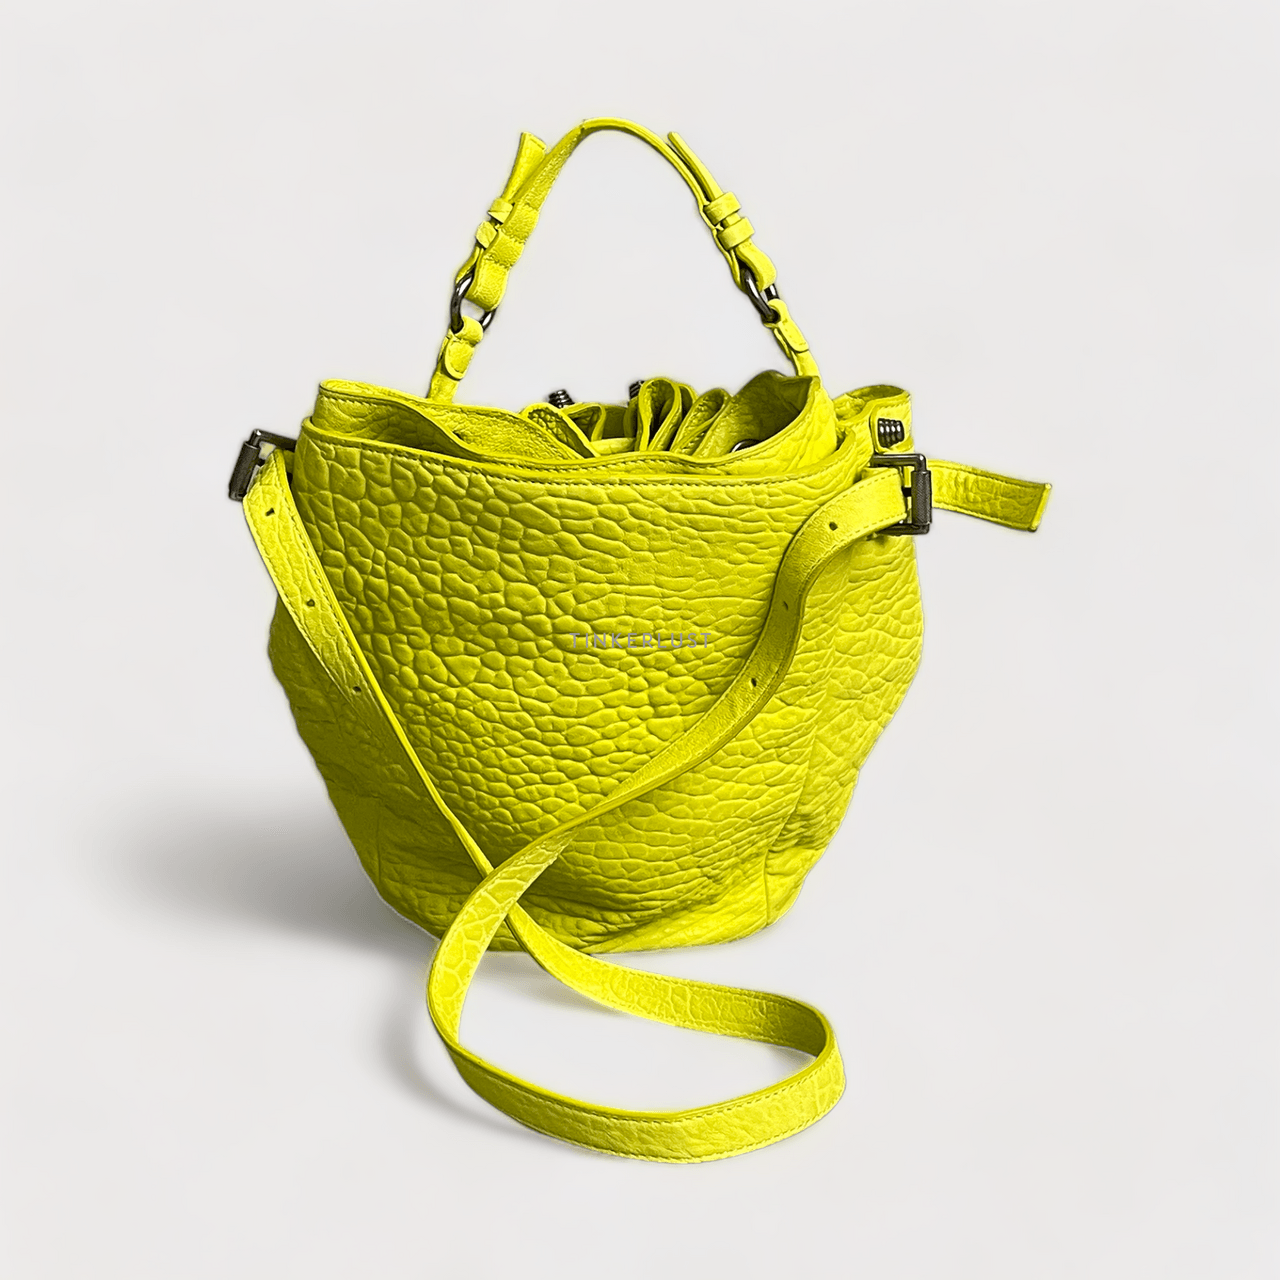 Alexander Wang Lime Textured Leather Diego Bucket Bag